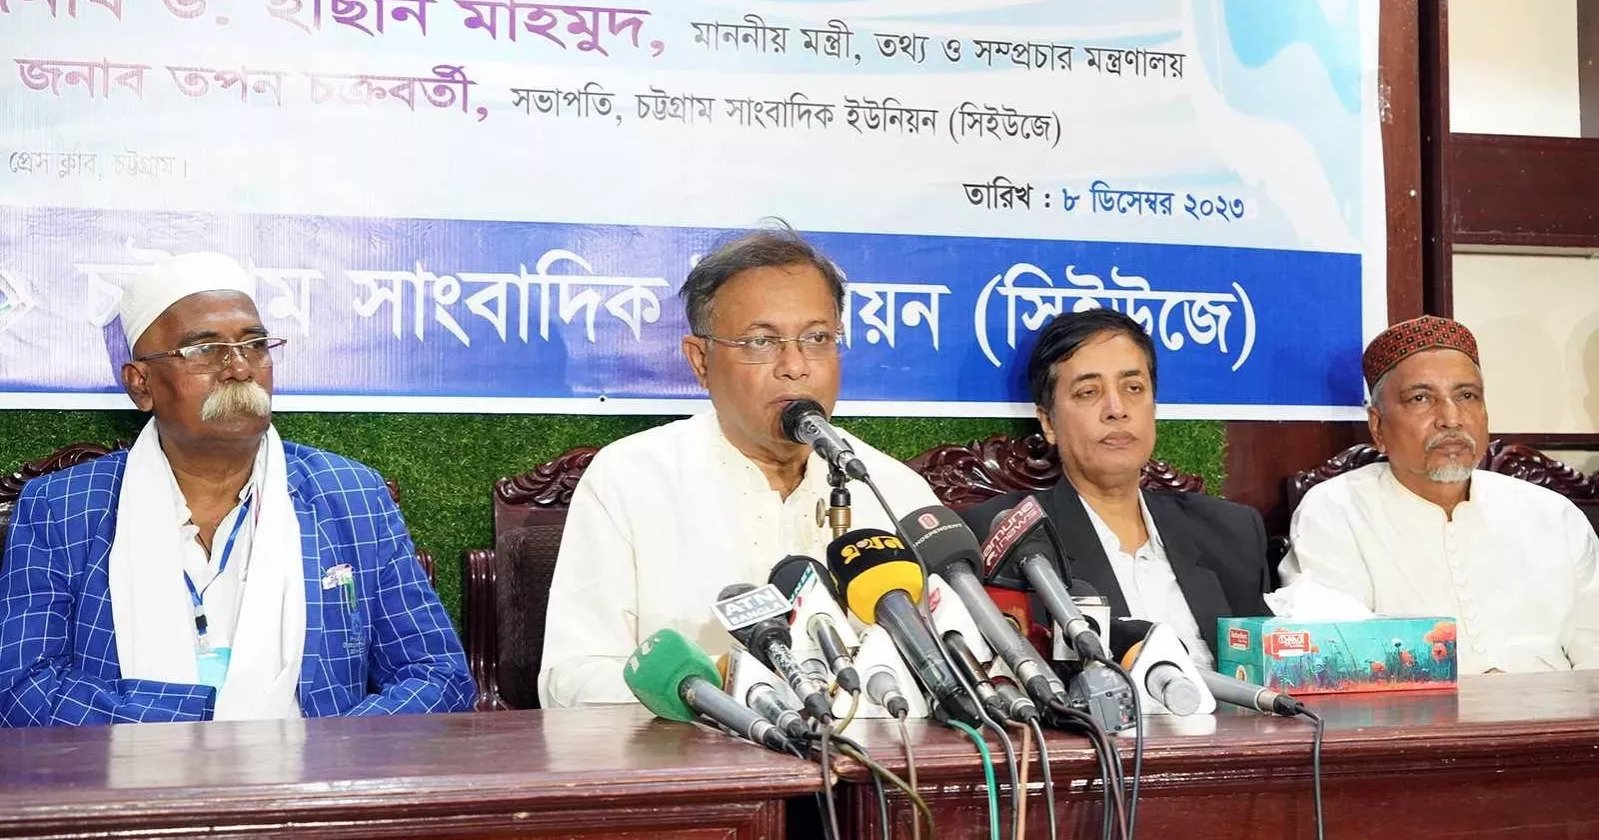 Conspiracy to destabilize the country ahead of Human Rights Day exposed: Hasan Mahmud